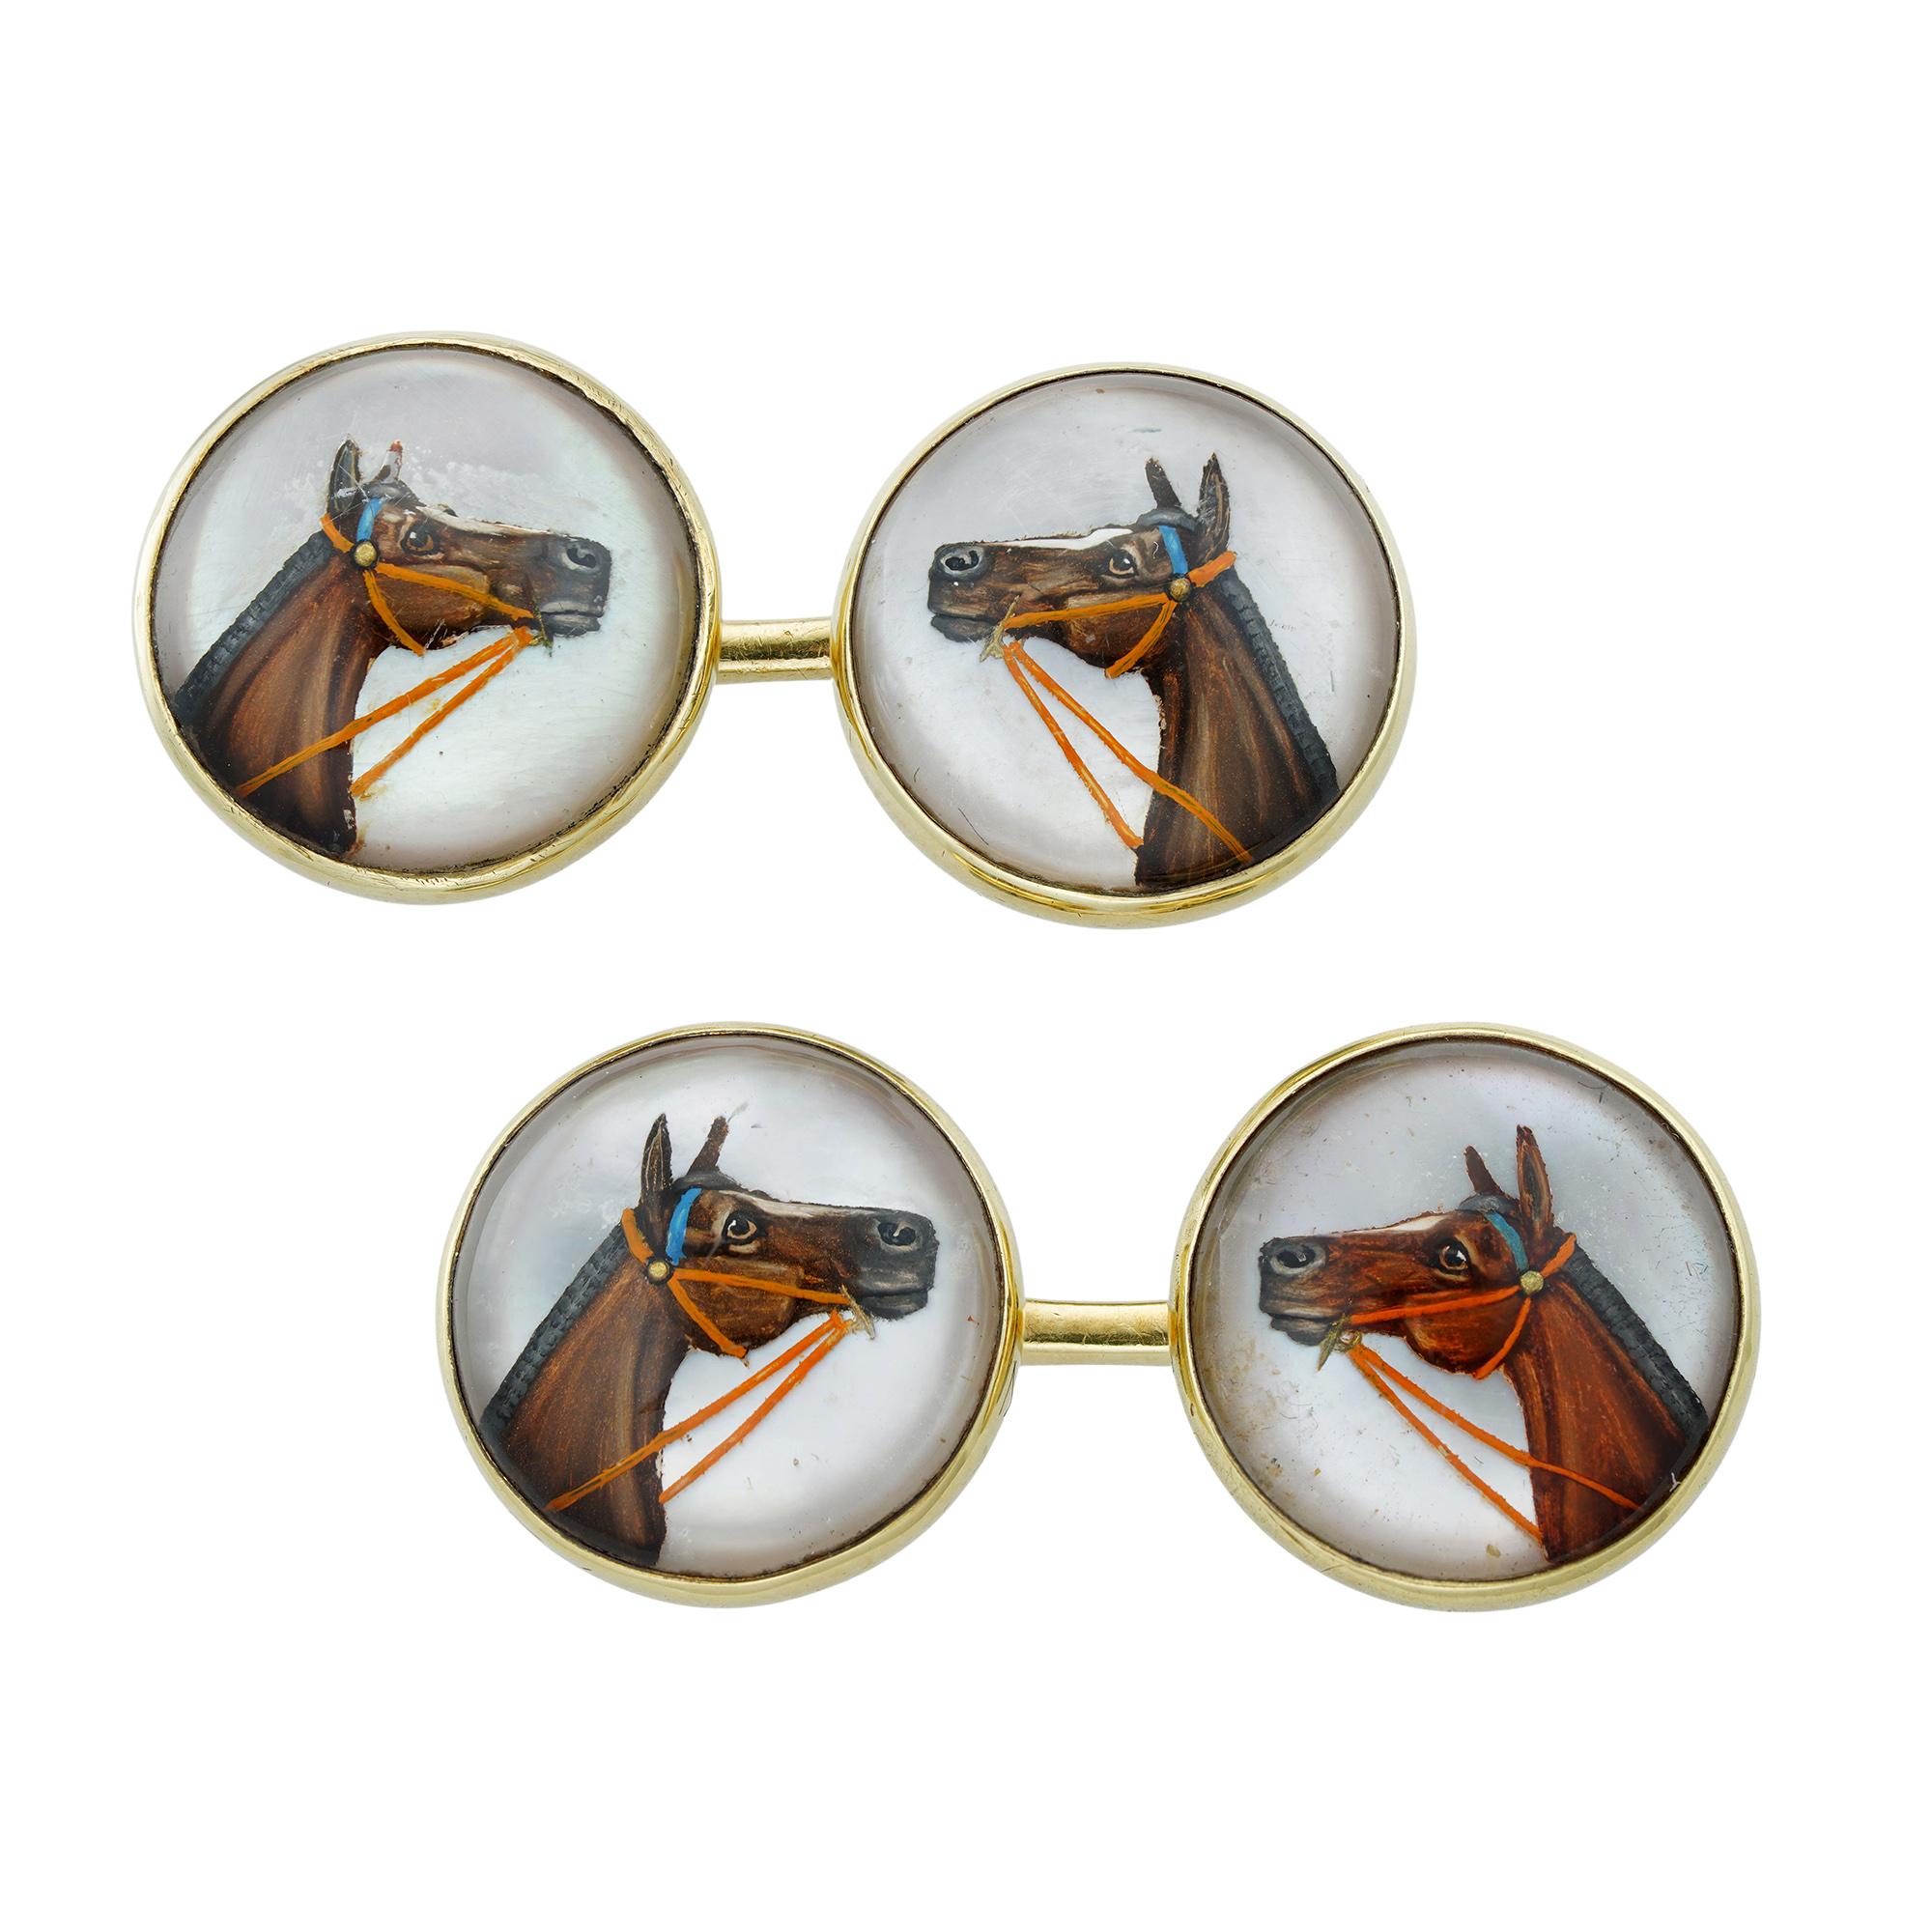 A pair of Edwardian reverse intaglio crystal cufflinks, the cabochon-cut crystal faces each engraved and painted on reverse with the profile image of a horse bust, to a mother-of-pearl background, each link measuring approximately 1.4cm in diameter,